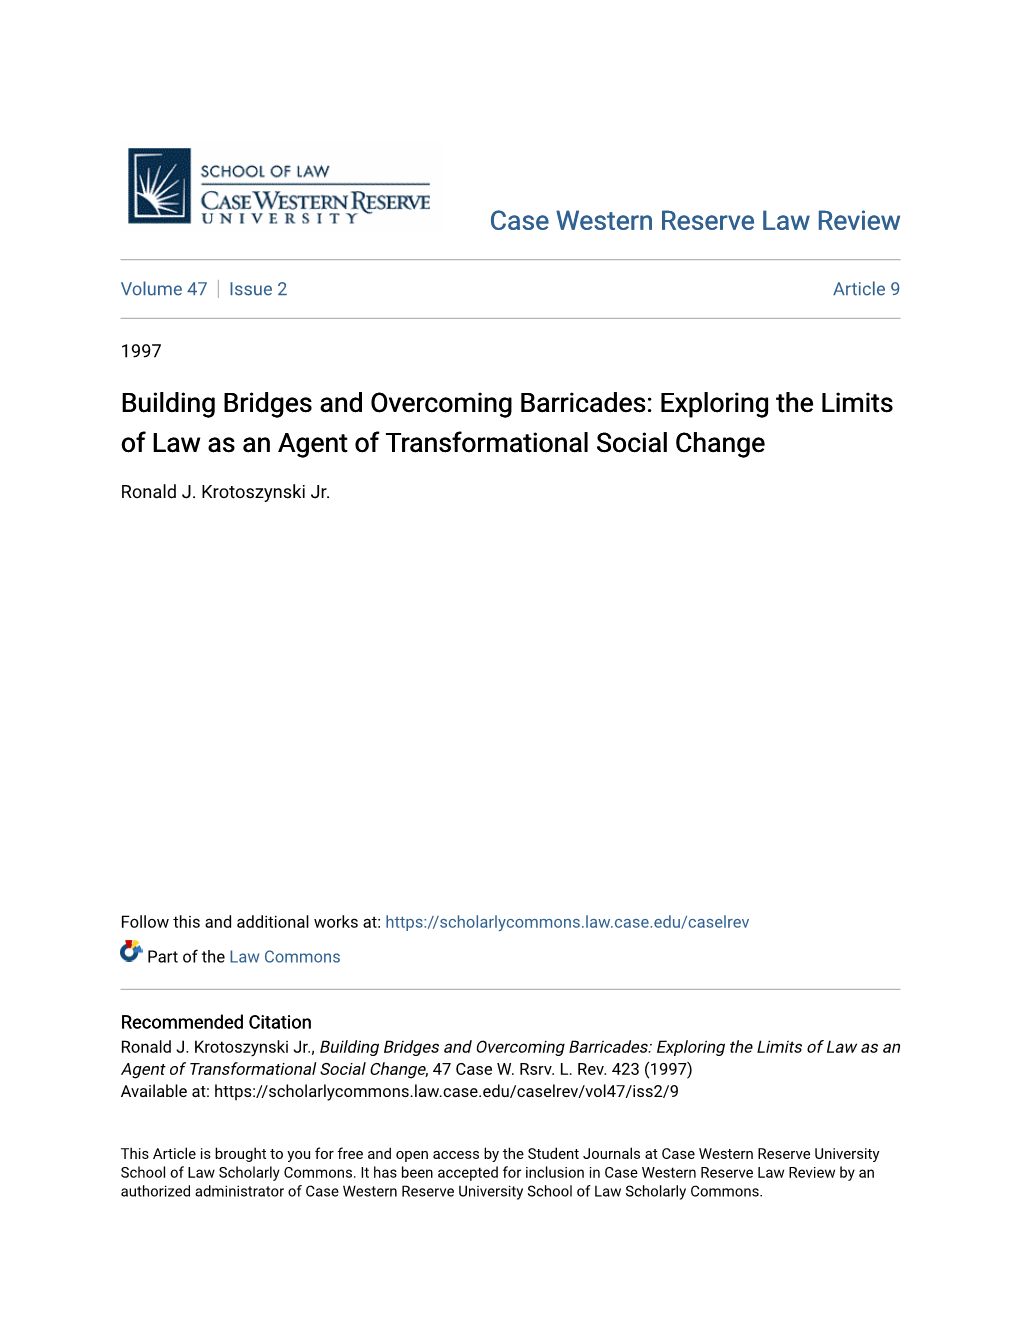 Building Bridges and Overcoming Barricades: Exploring the Limits of Law As an Agent of Transformational Social Change